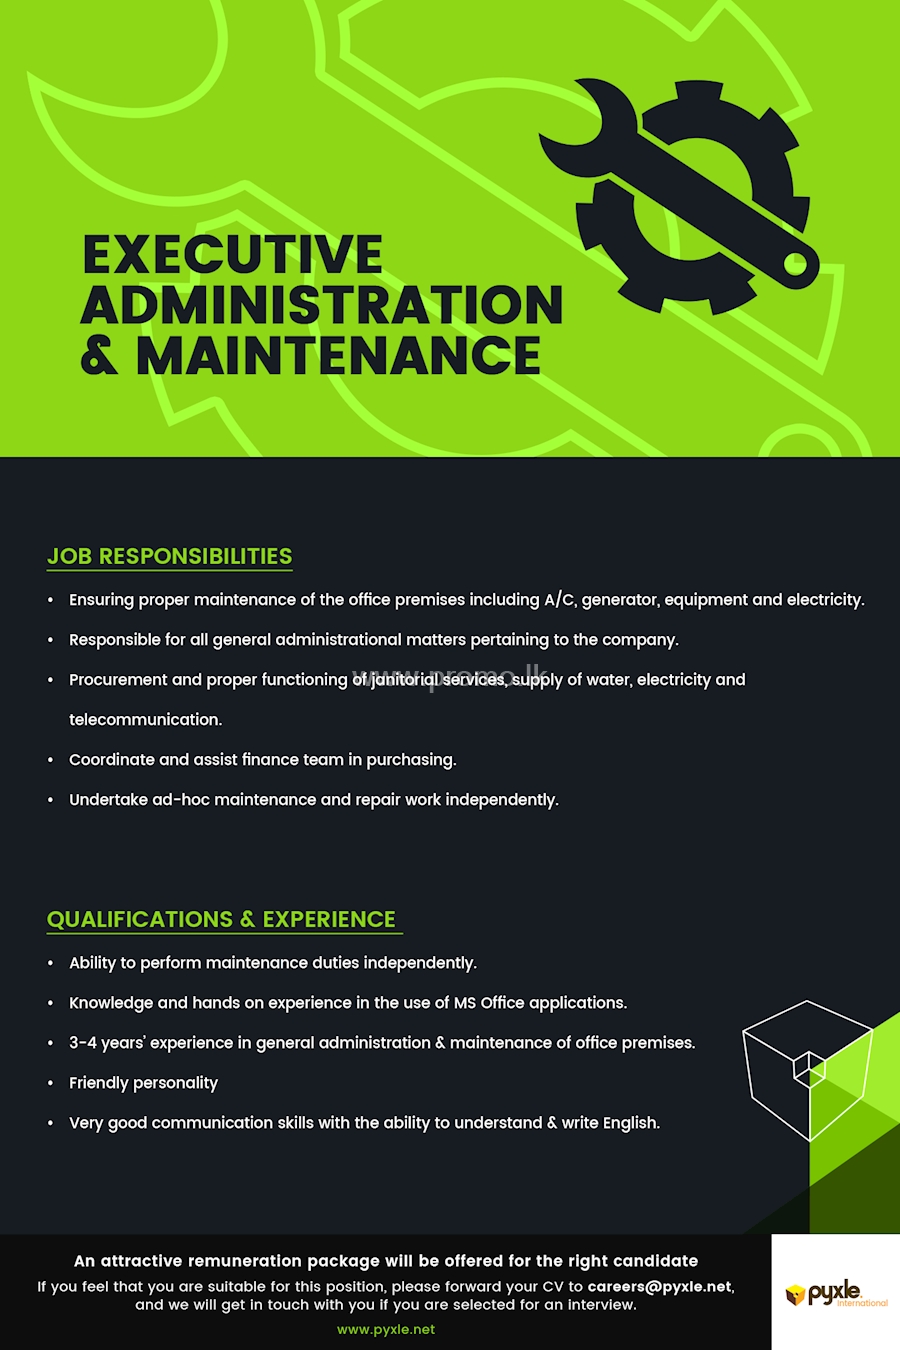 Executive Administration and Maintenance 